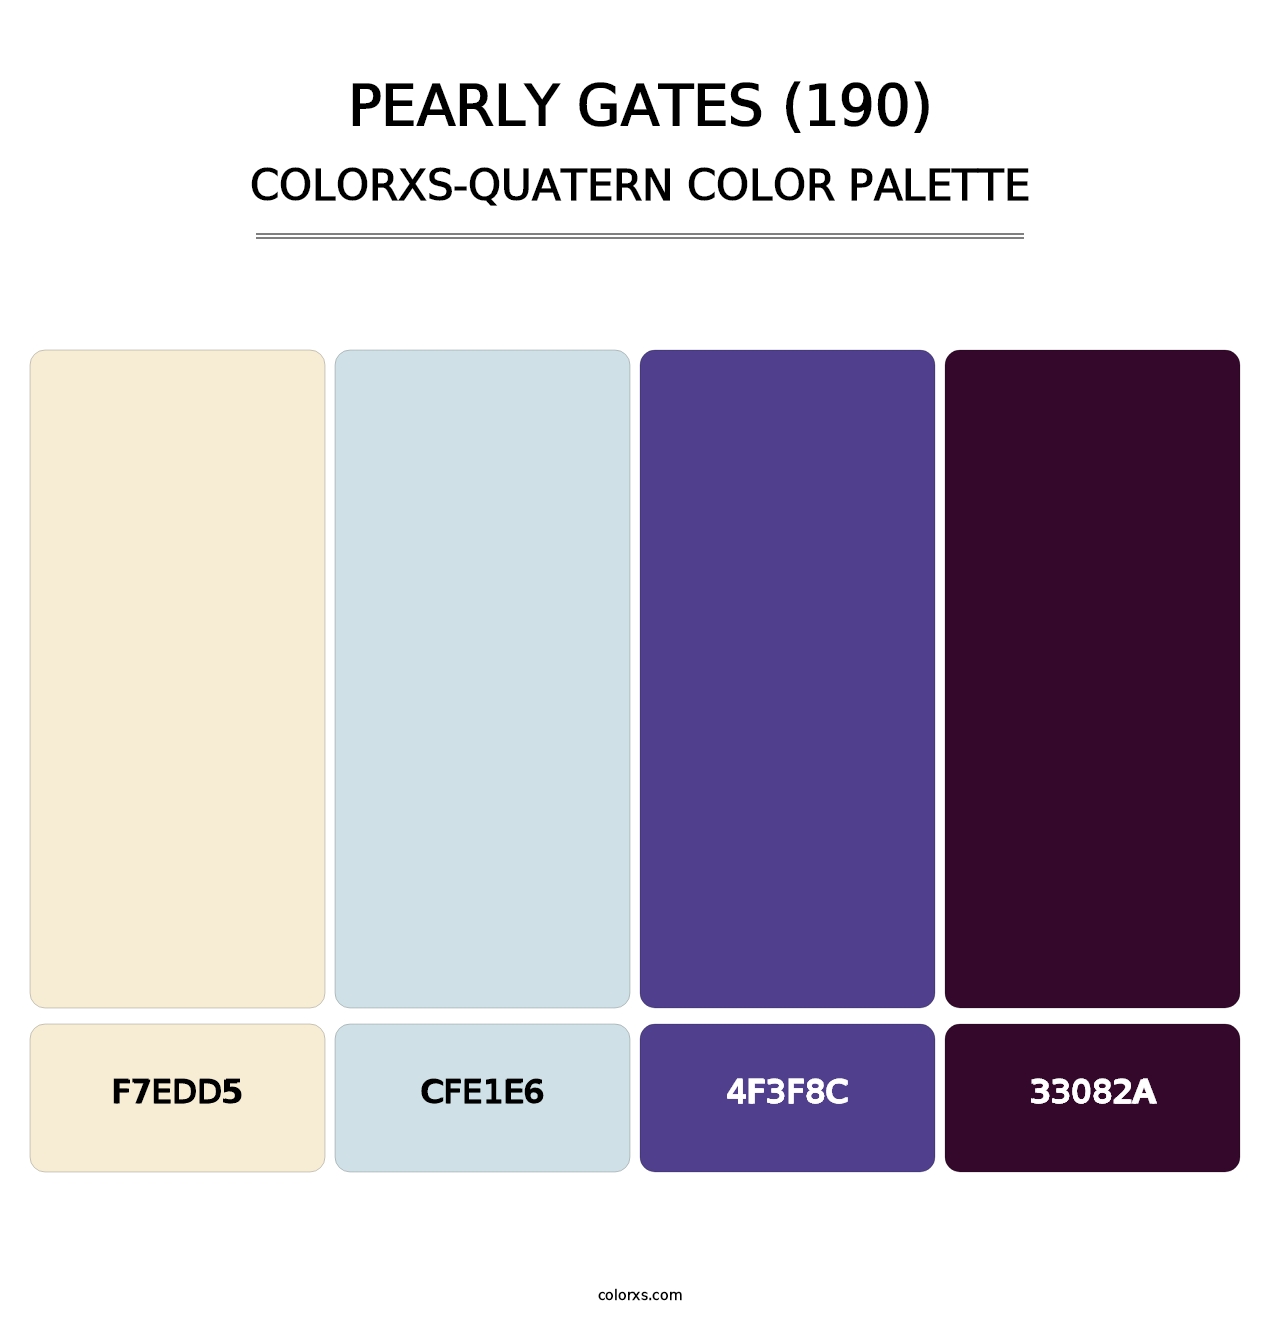 Pearly Gates (190) - Colorxs Quatern Palette